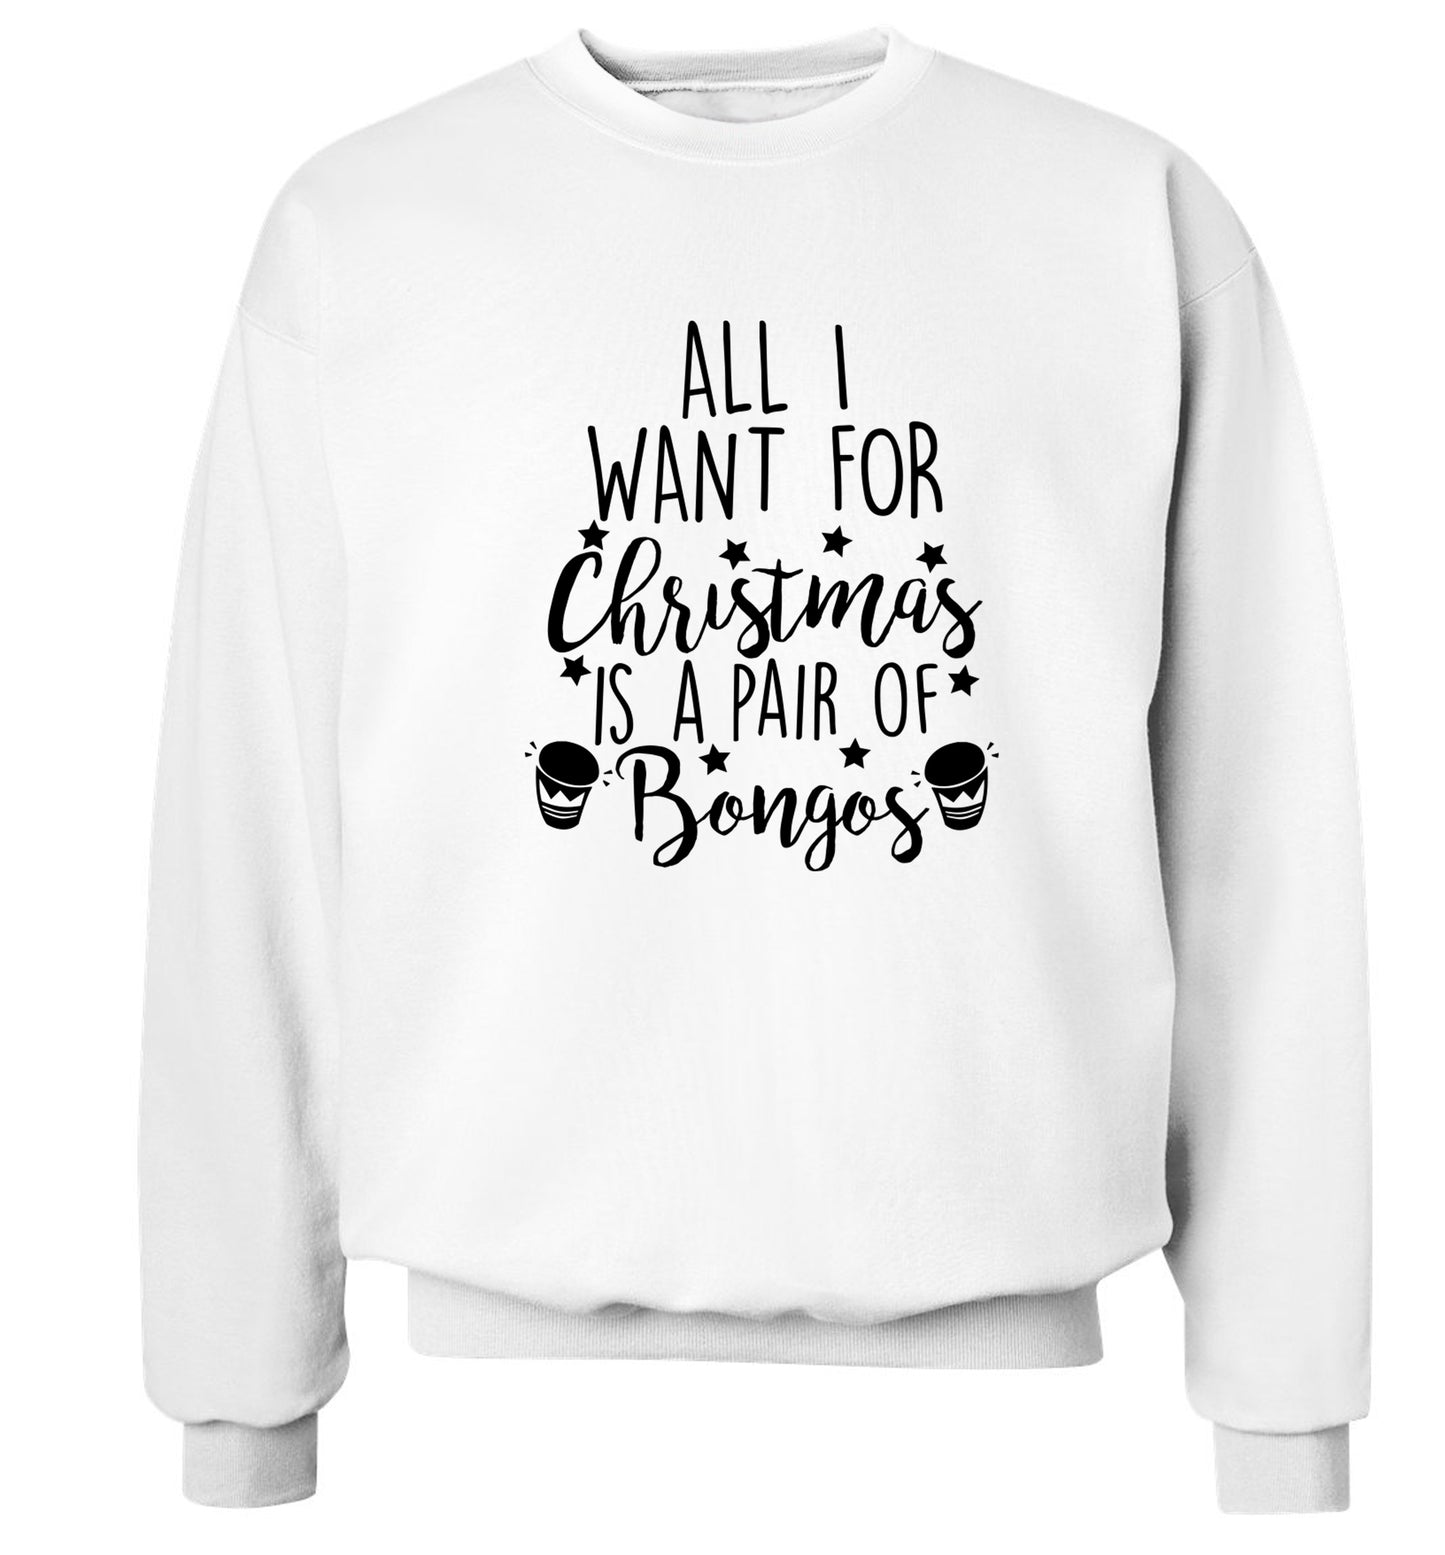 All I want for Christmas is a pair of bongos! Adult's unisex white Sweater 2XL